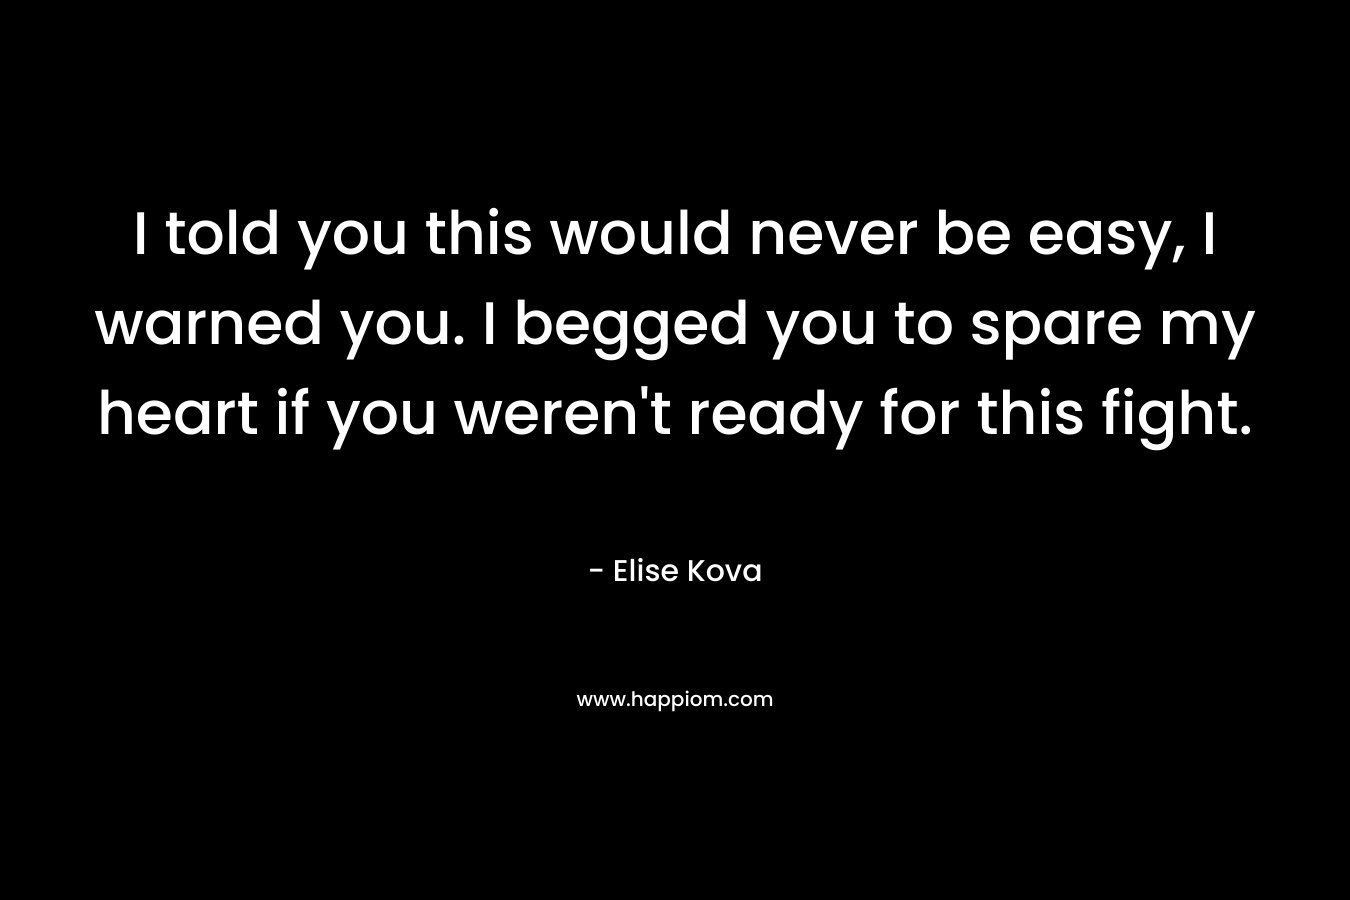 I told you this would never be easy, I warned you. I begged you to spare my heart if you weren’t ready for this fight. – Elise Kova